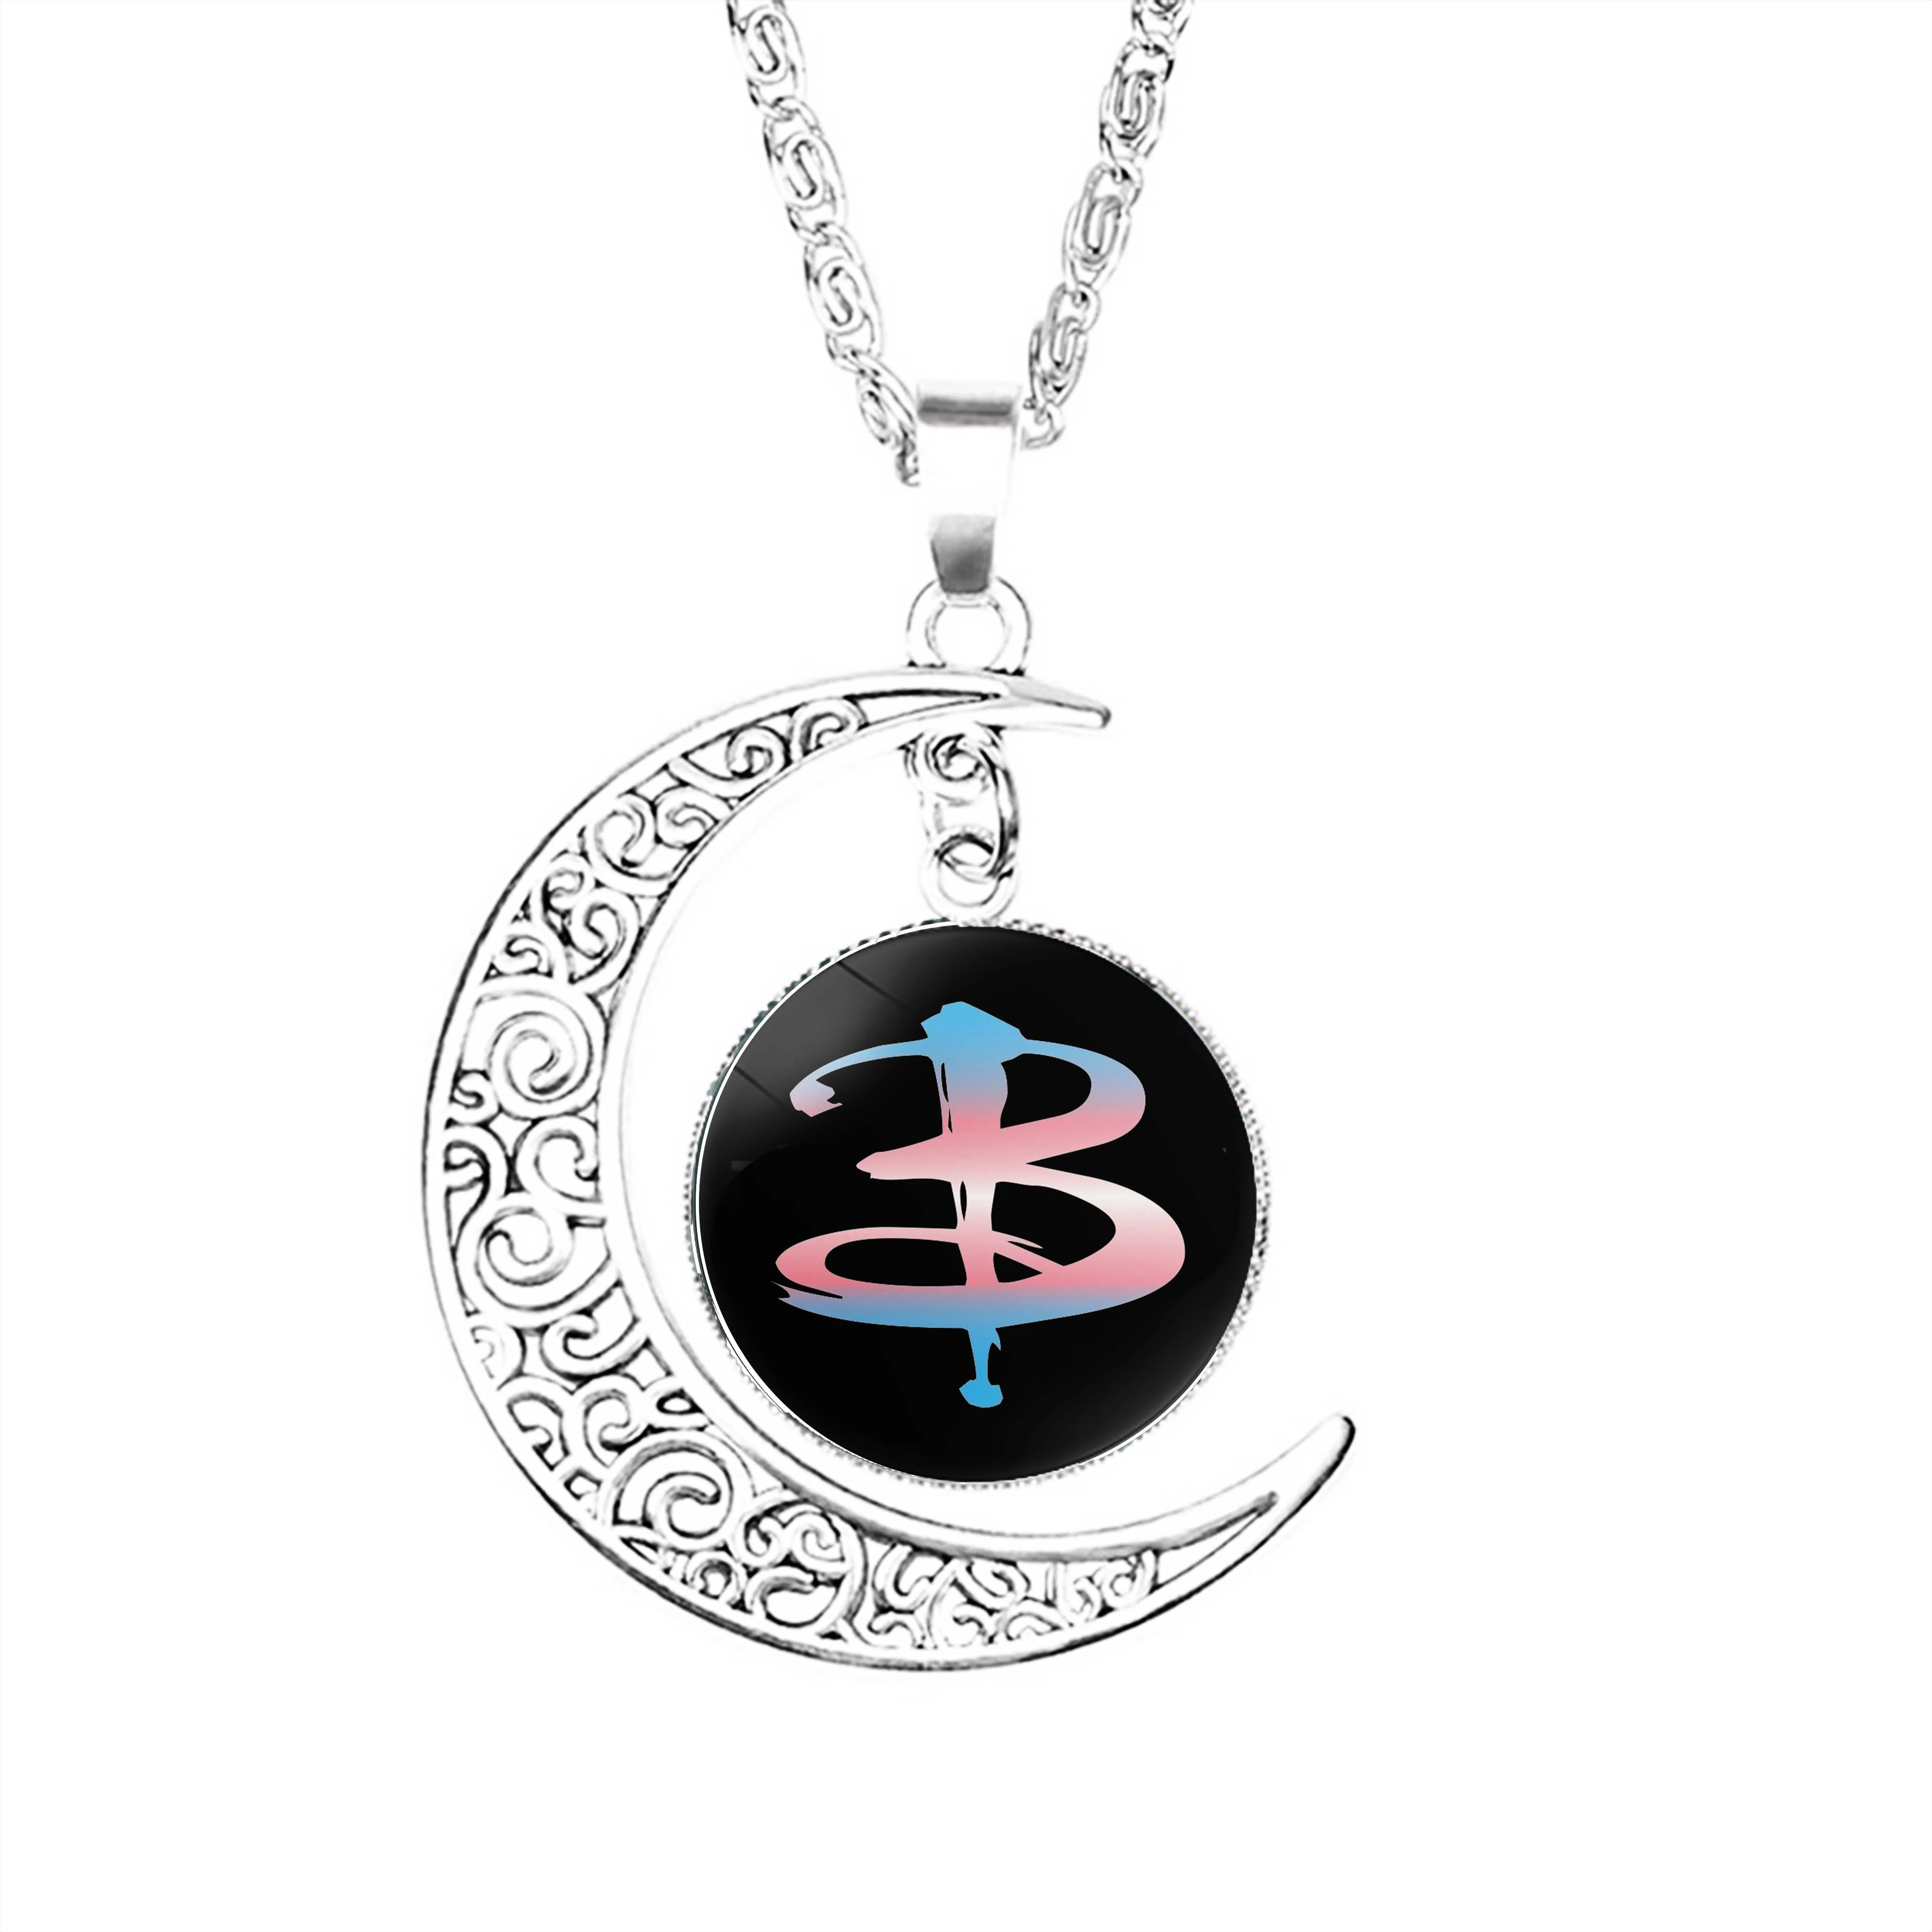 

B Logo Trans Pride Buffy Moon Necklace Women Charm Dome Stainless Steel Men Girls Fashion Gifts Jewelry Lady Lovers